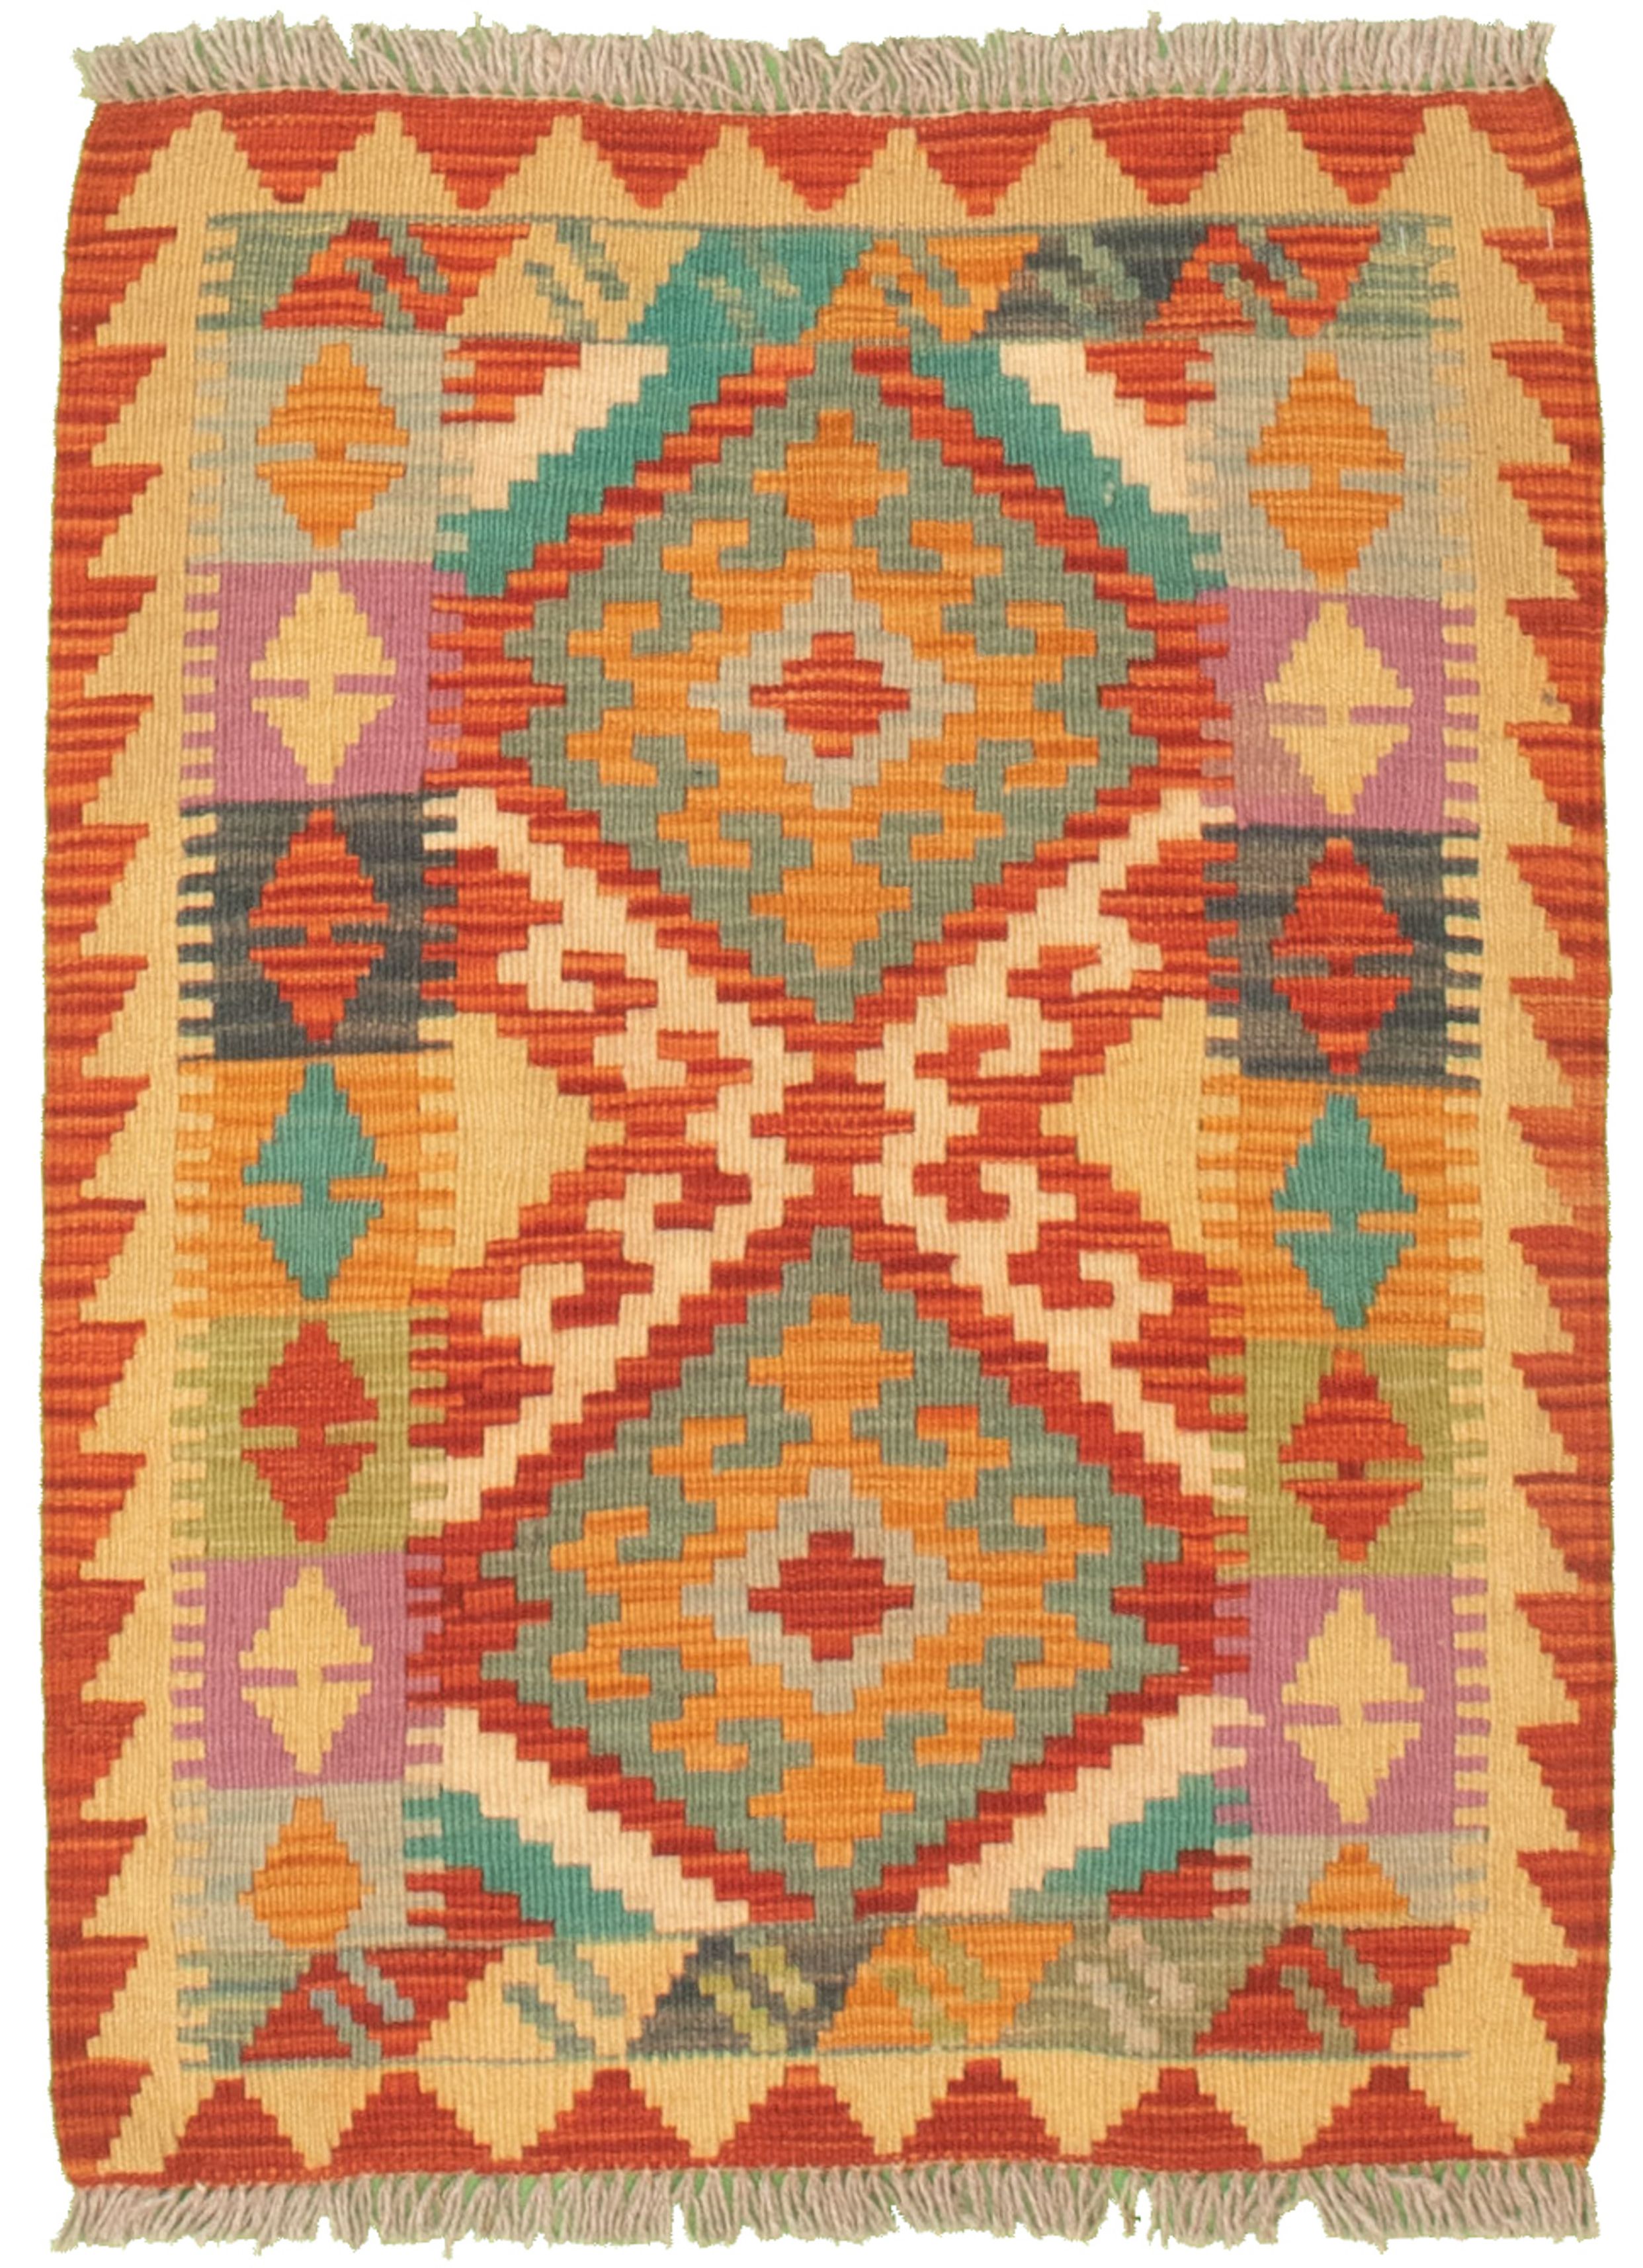 Hand woven Bold and Colorful  Cream, Red Cotton Kilim 2'0" x 2'9" Size: 2'0" x 2'9"  